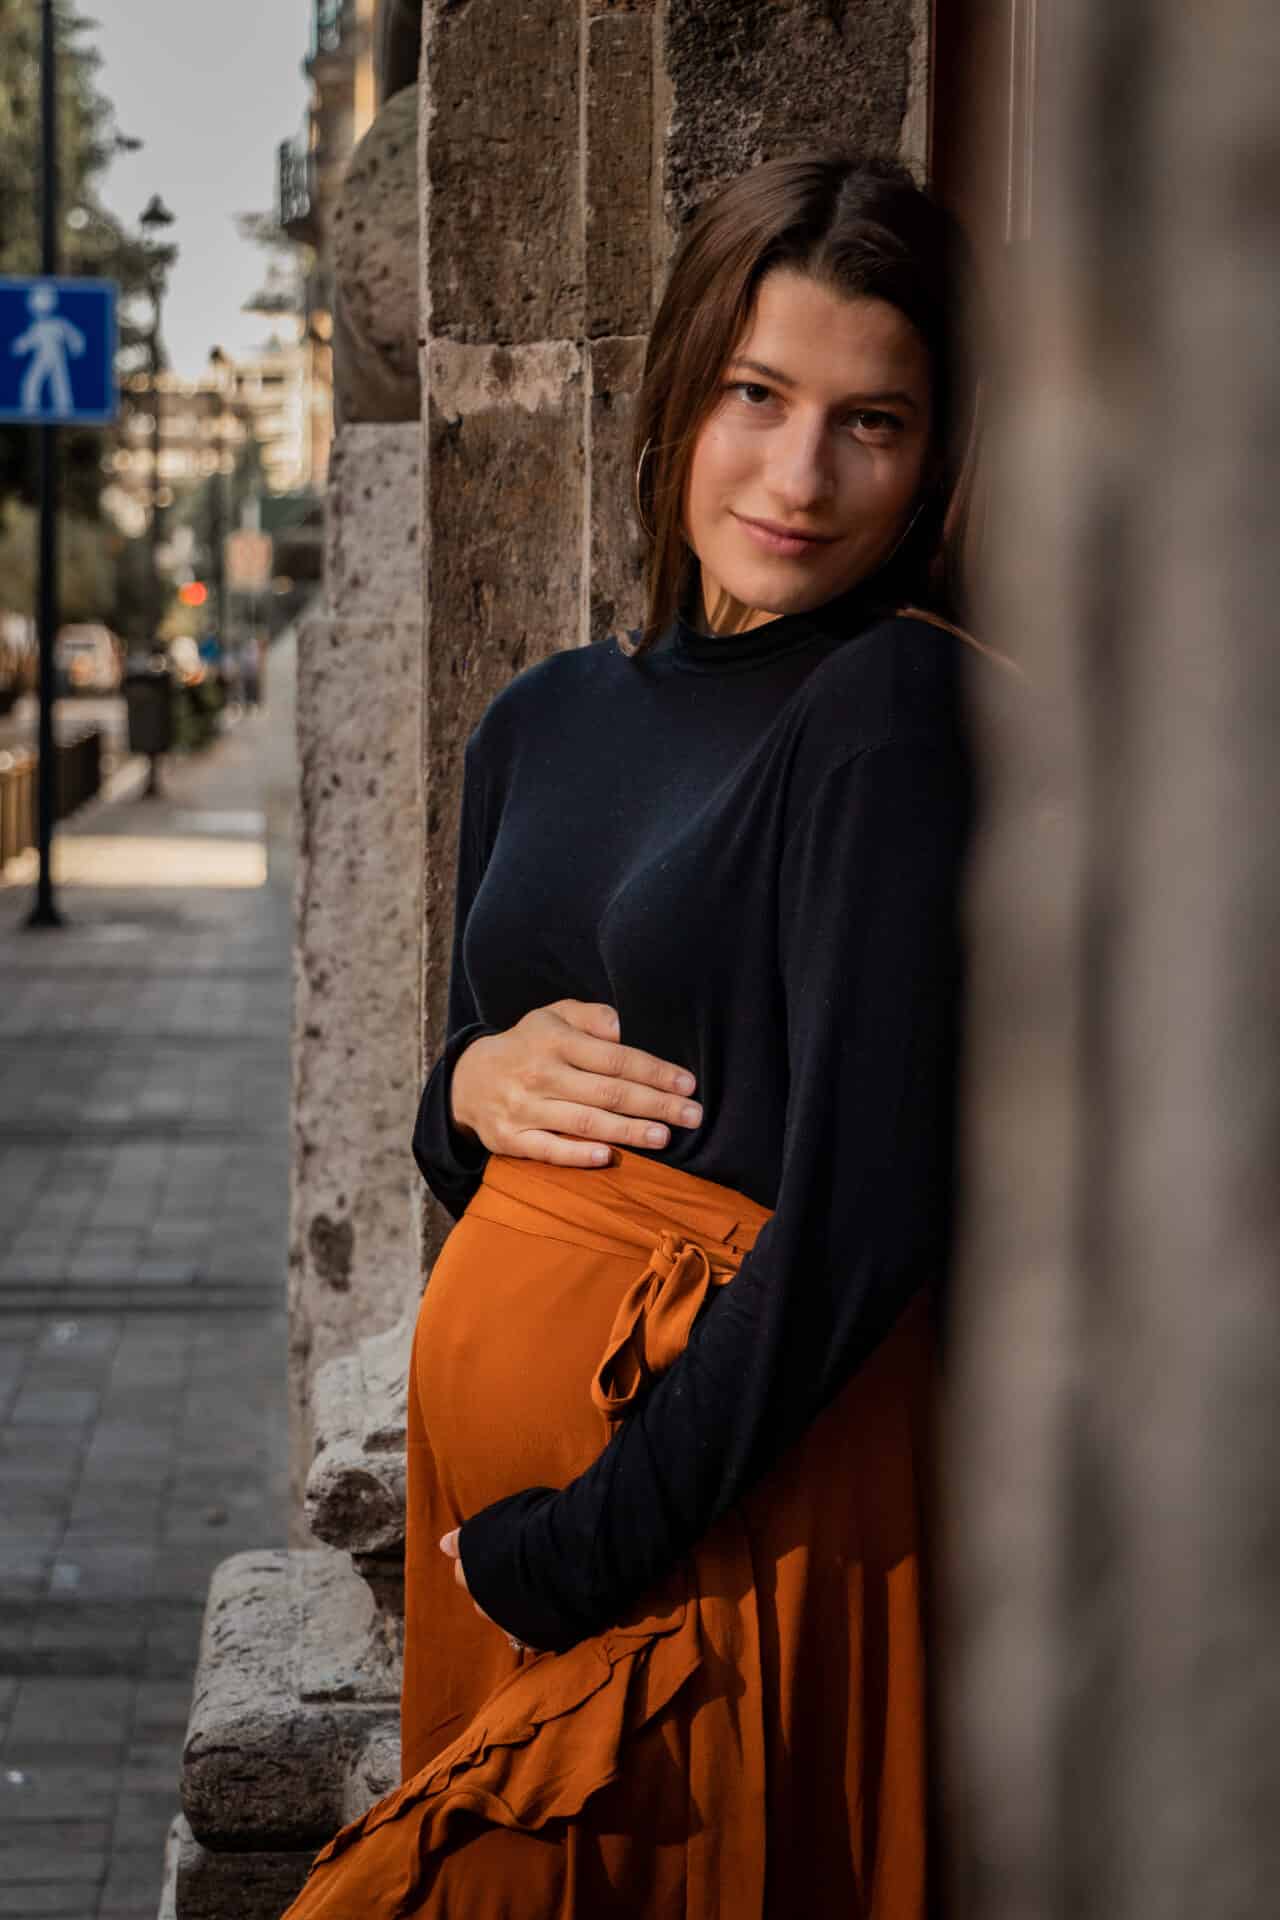 pregnany woman in black shirt and orange skirt holding her belly